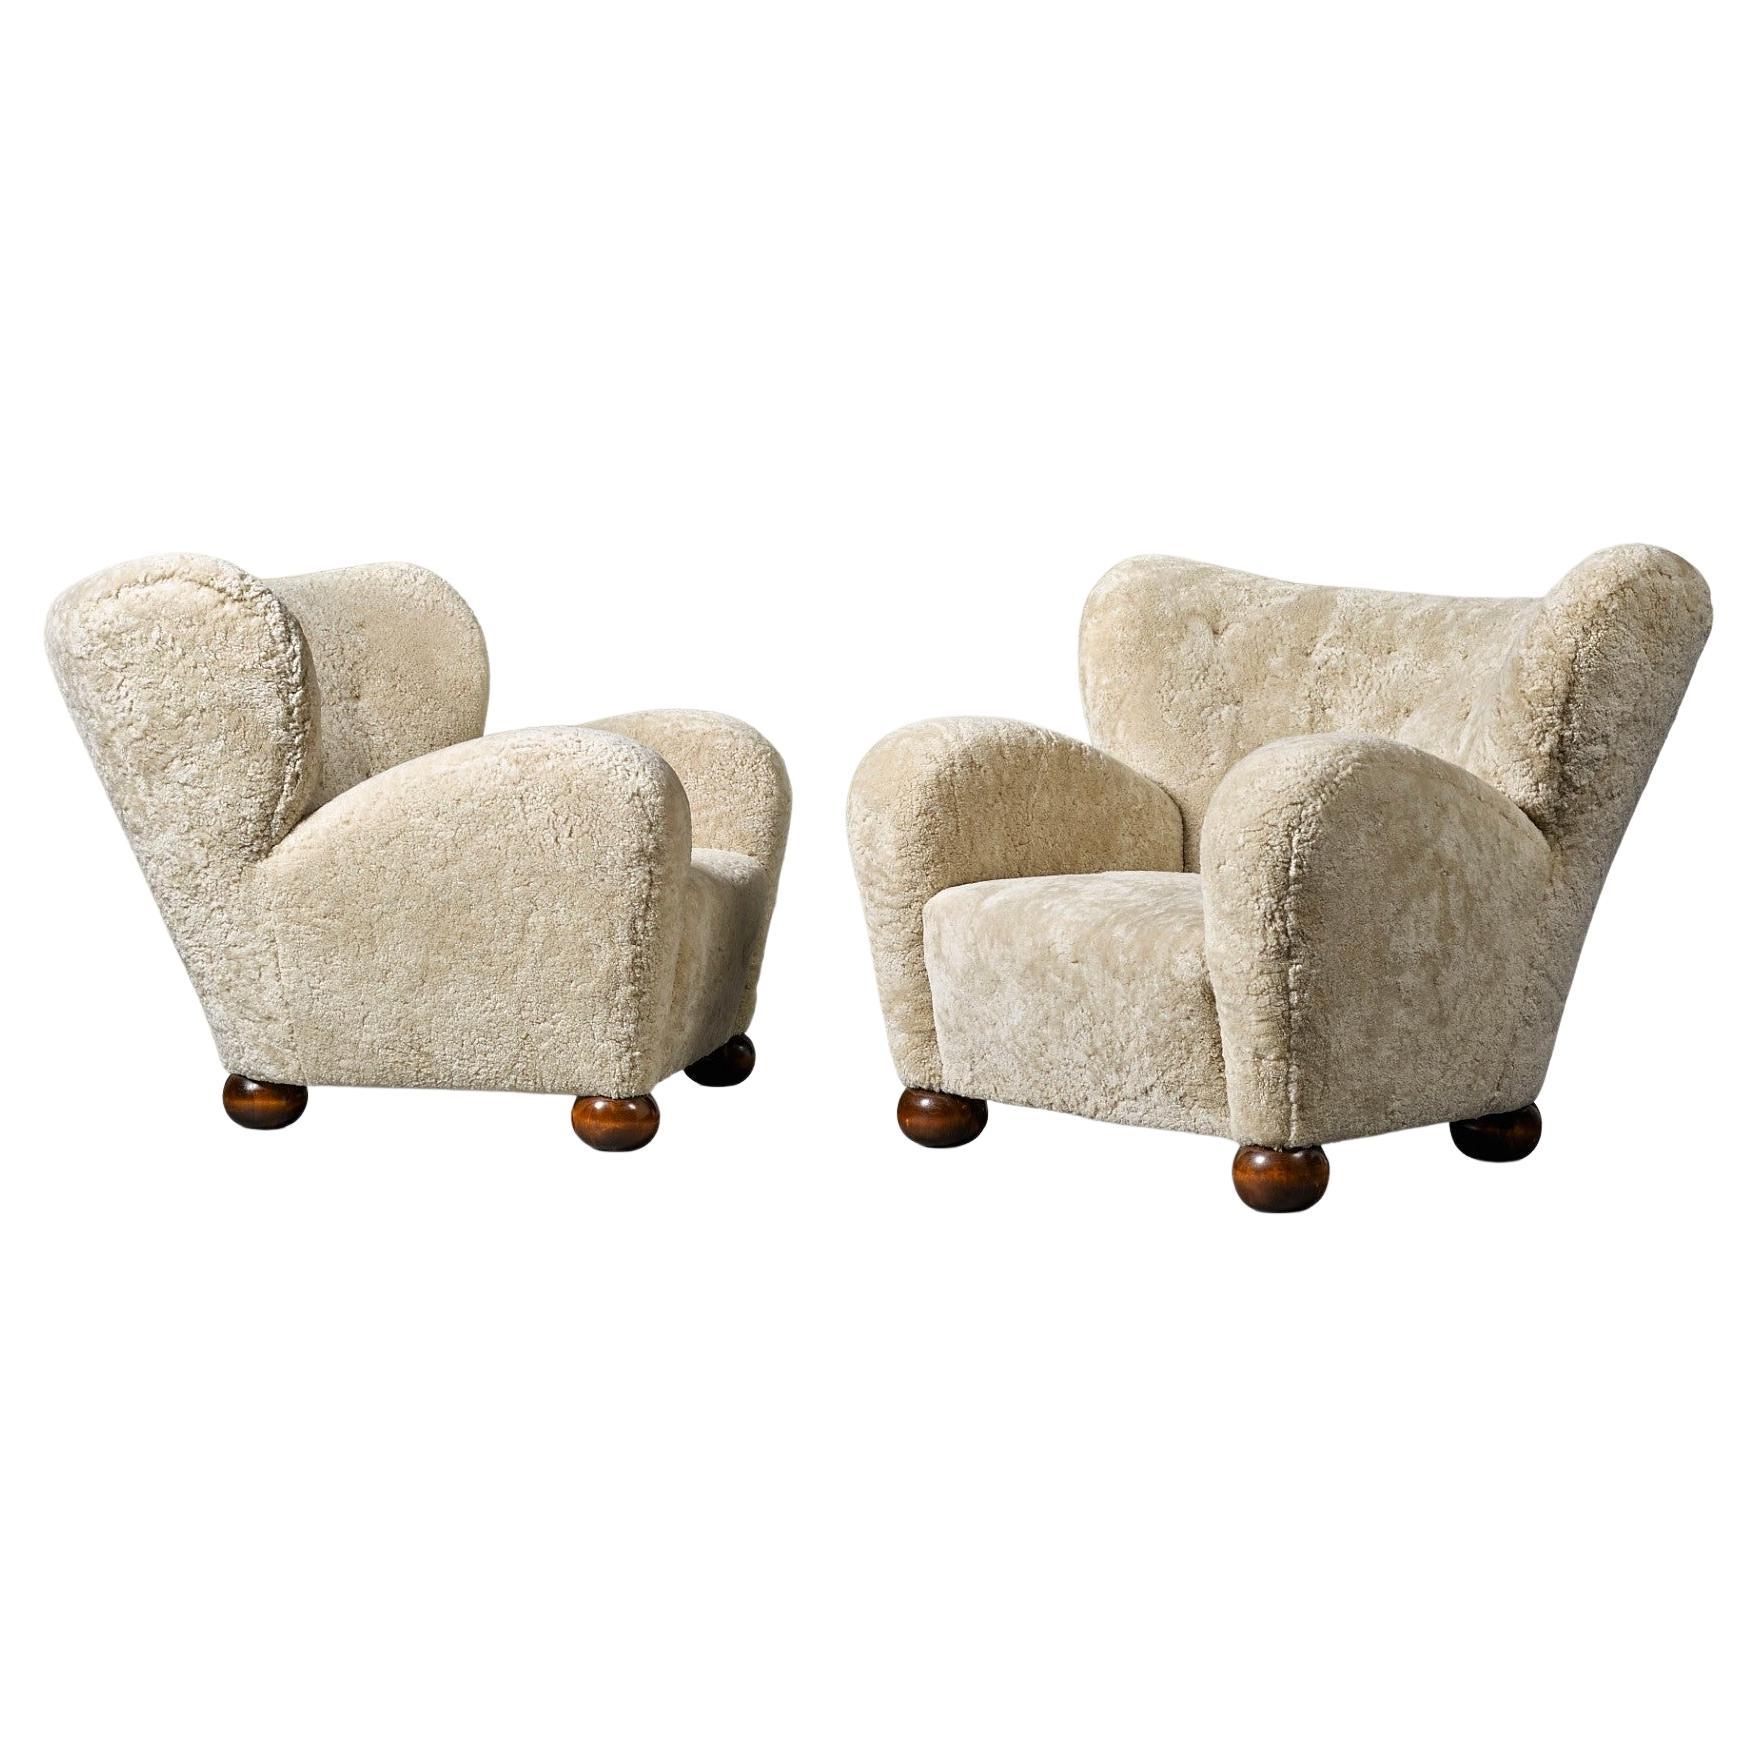 Marta Blomstedt Pair of Easy Chairs in Sheepskin for Hotel Aulanko Finland, 1939